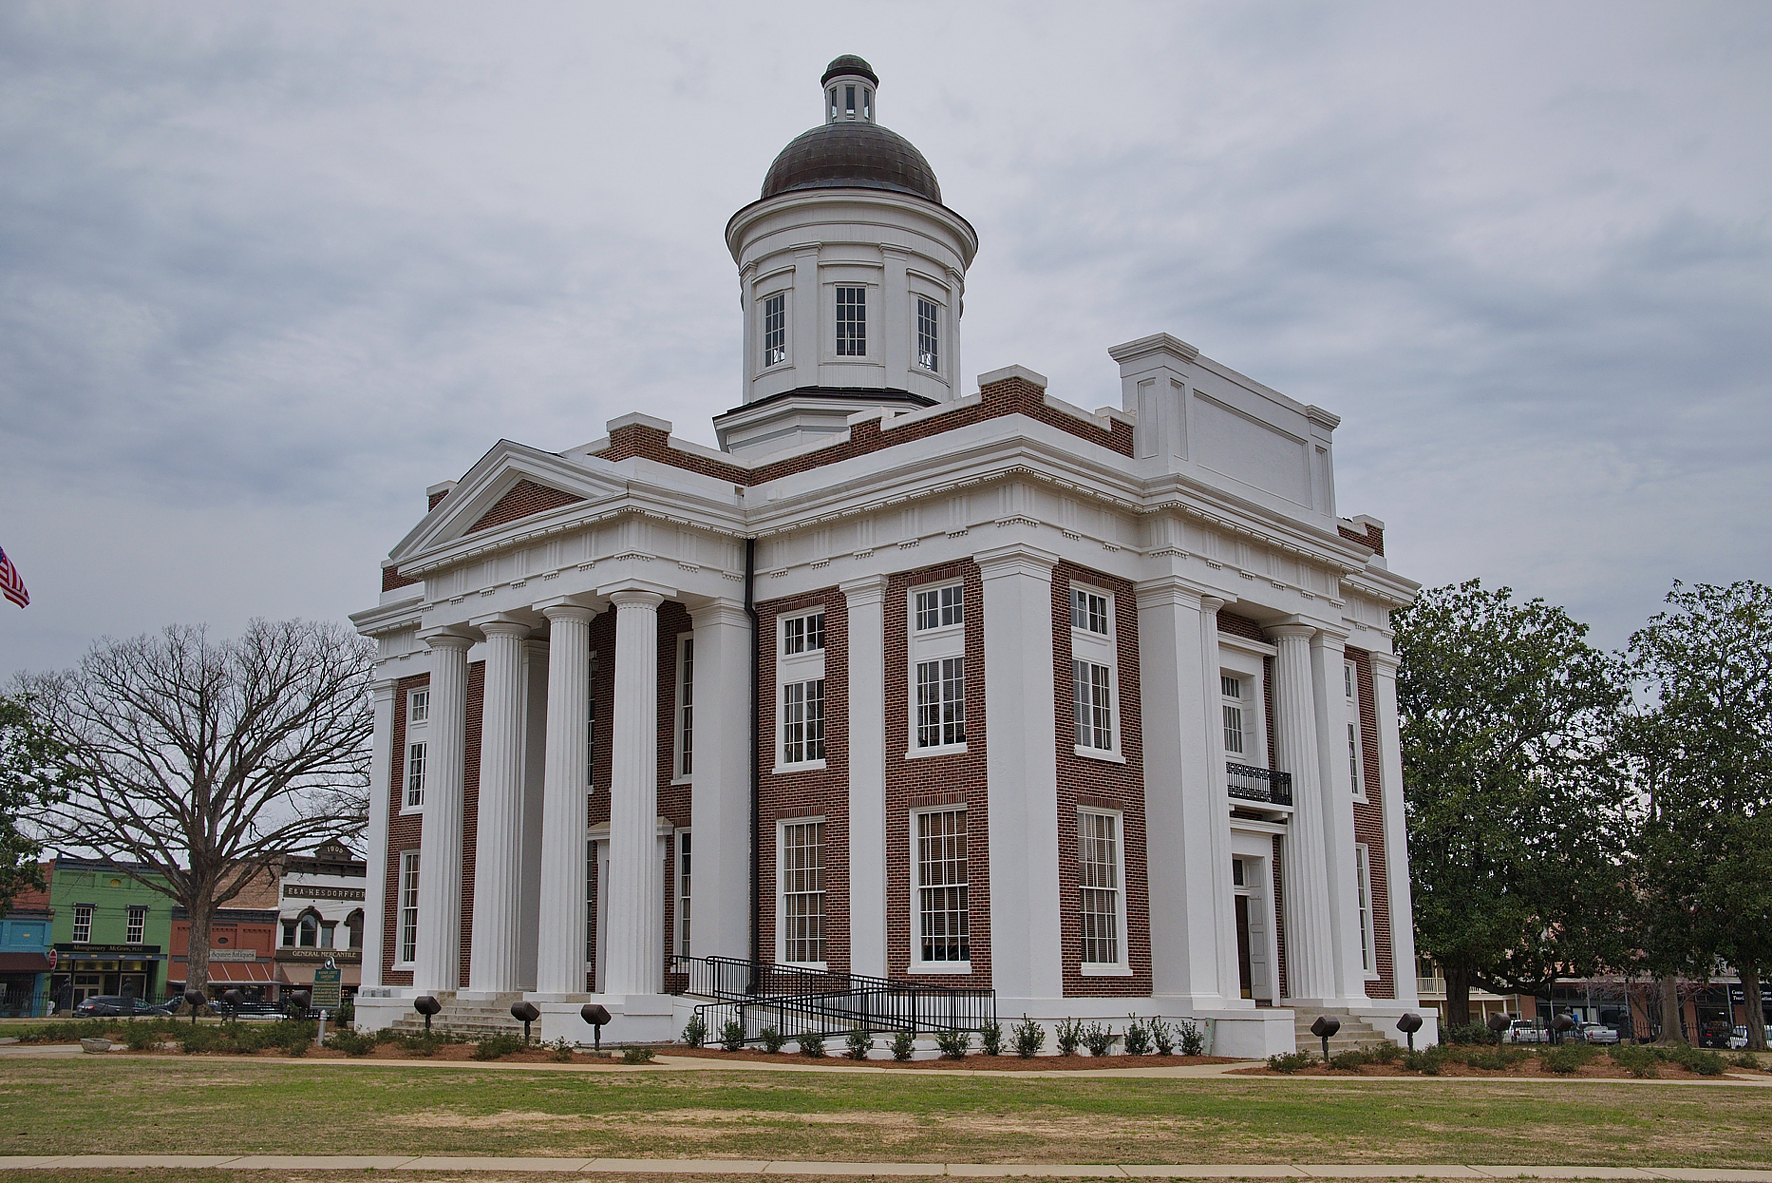  The old Madison County Courthouse - I almost tried a case here in the early 1990's before the court was moved to new quarters - the case settled 